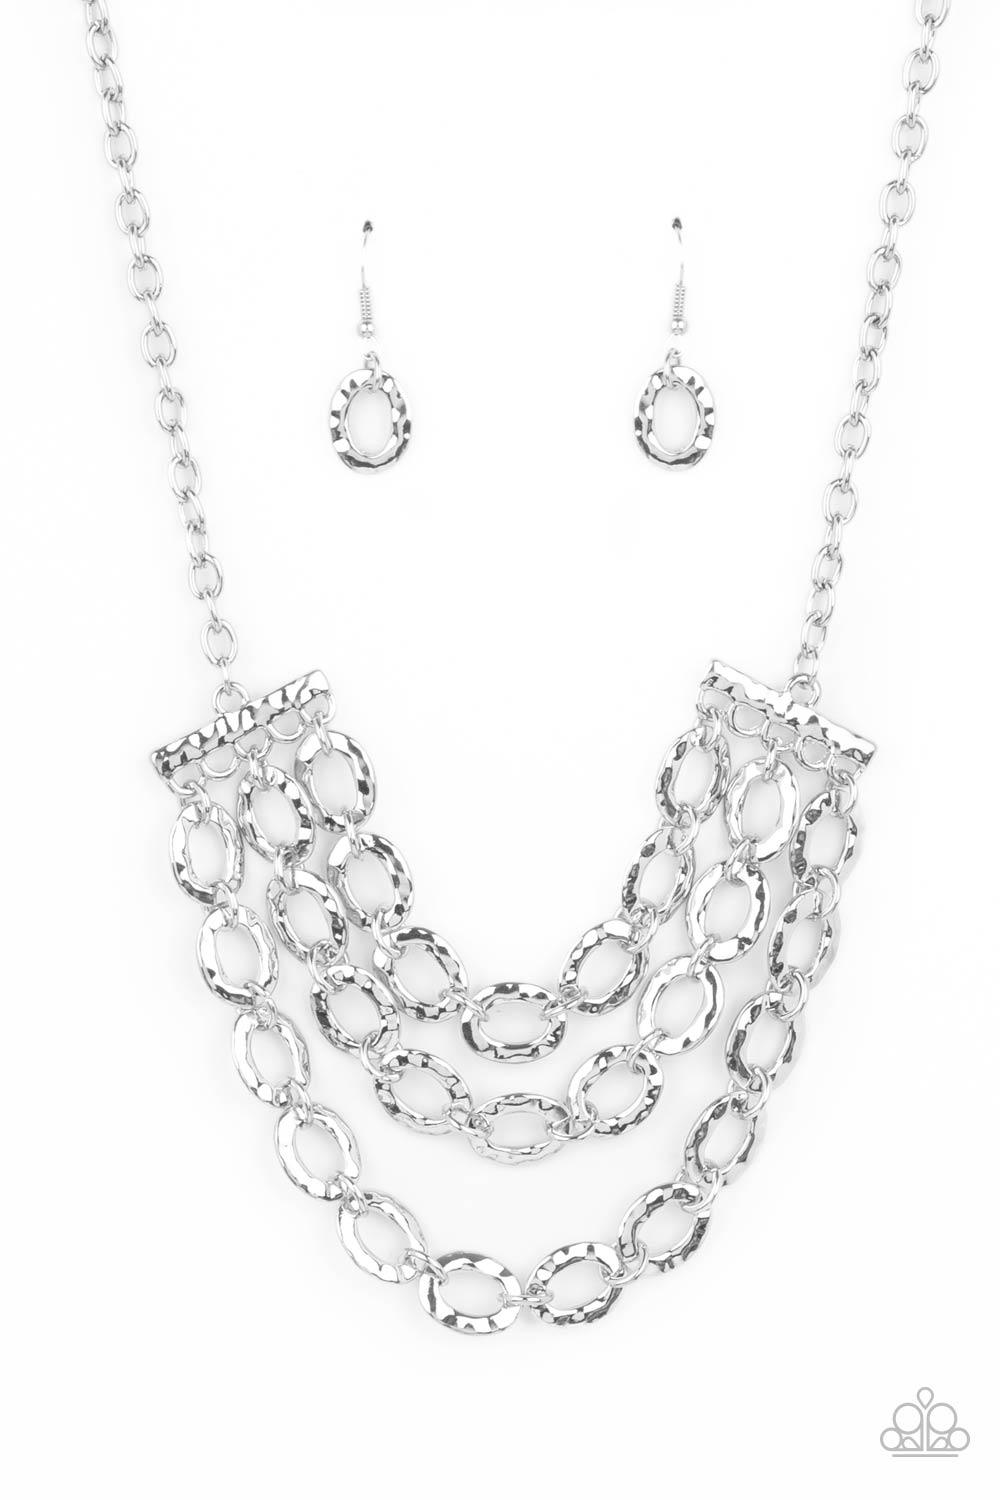 Paparazzi Accessories Repeat After Me - Silver Three rows of shiny silver chains with oversized hammered oval links attach to silver bars for an edgy display below the collar. Features an adjustable clasp closure. Sold as one individual necklace. Includes